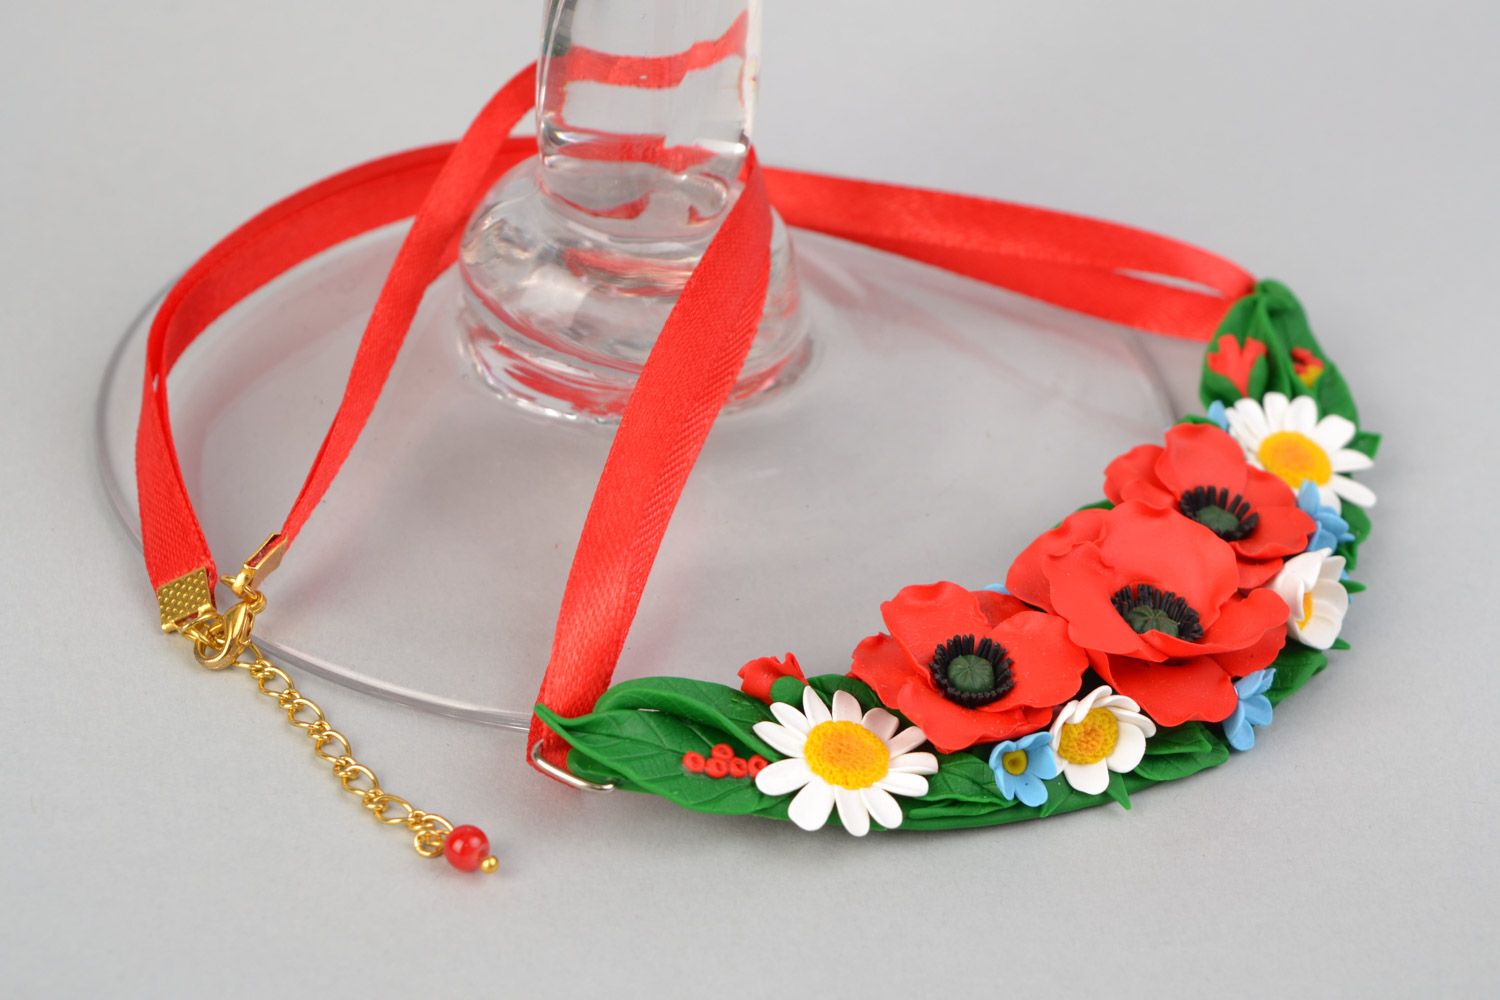 Festive handmade polymer clay colorful floral necklace on red satin ribbon photo 5